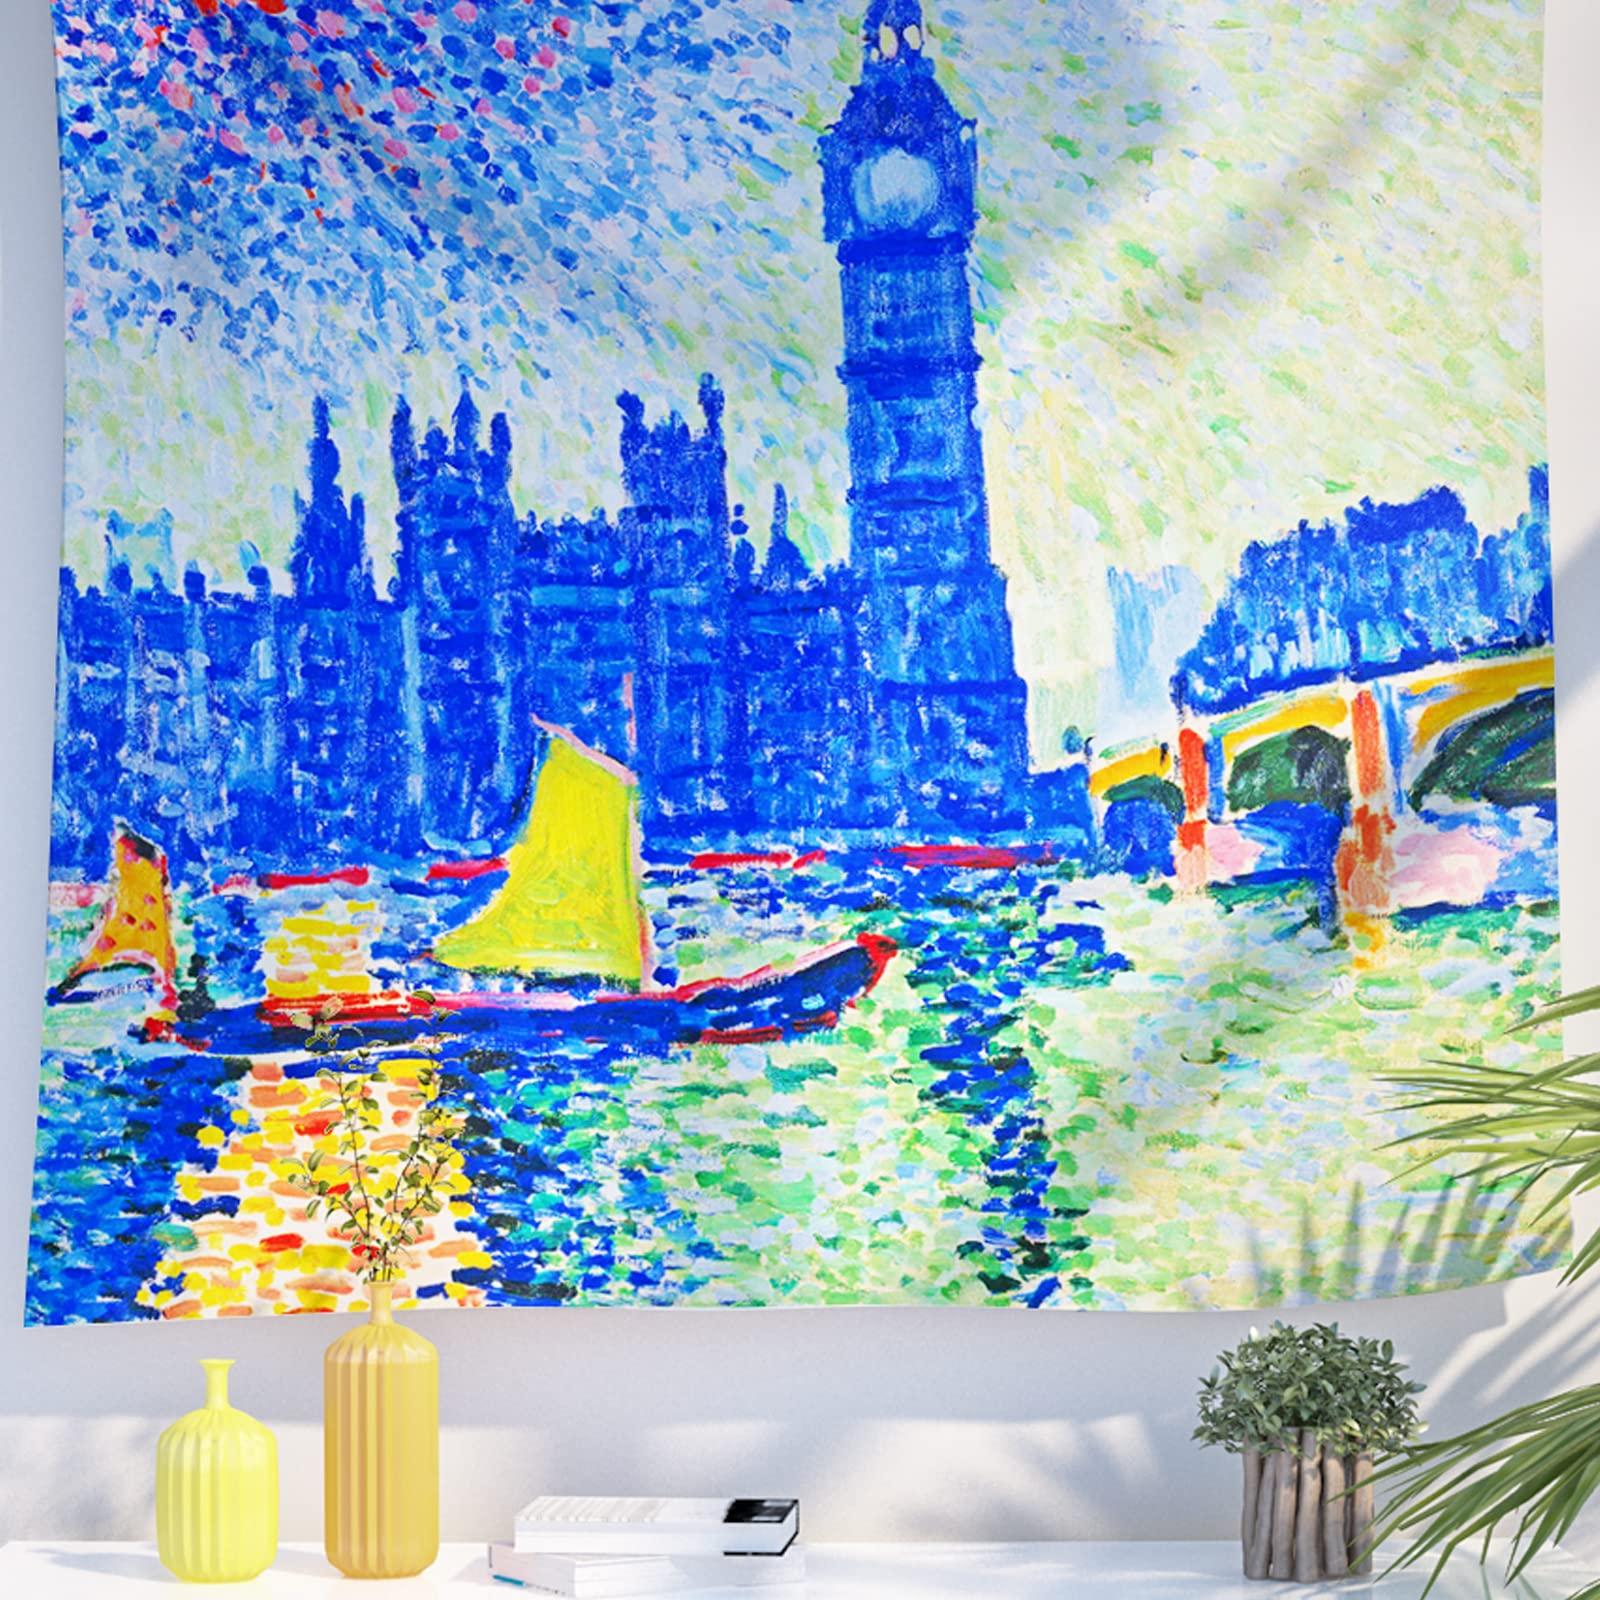 Berkin Arts Decor Tapestry for Wall Hanging Premium Polyester Fabric Backdrop Post-impressionism Impressionism Expressionism 59.1 x 78.7 Inch (Big Ben by Andre Derain)